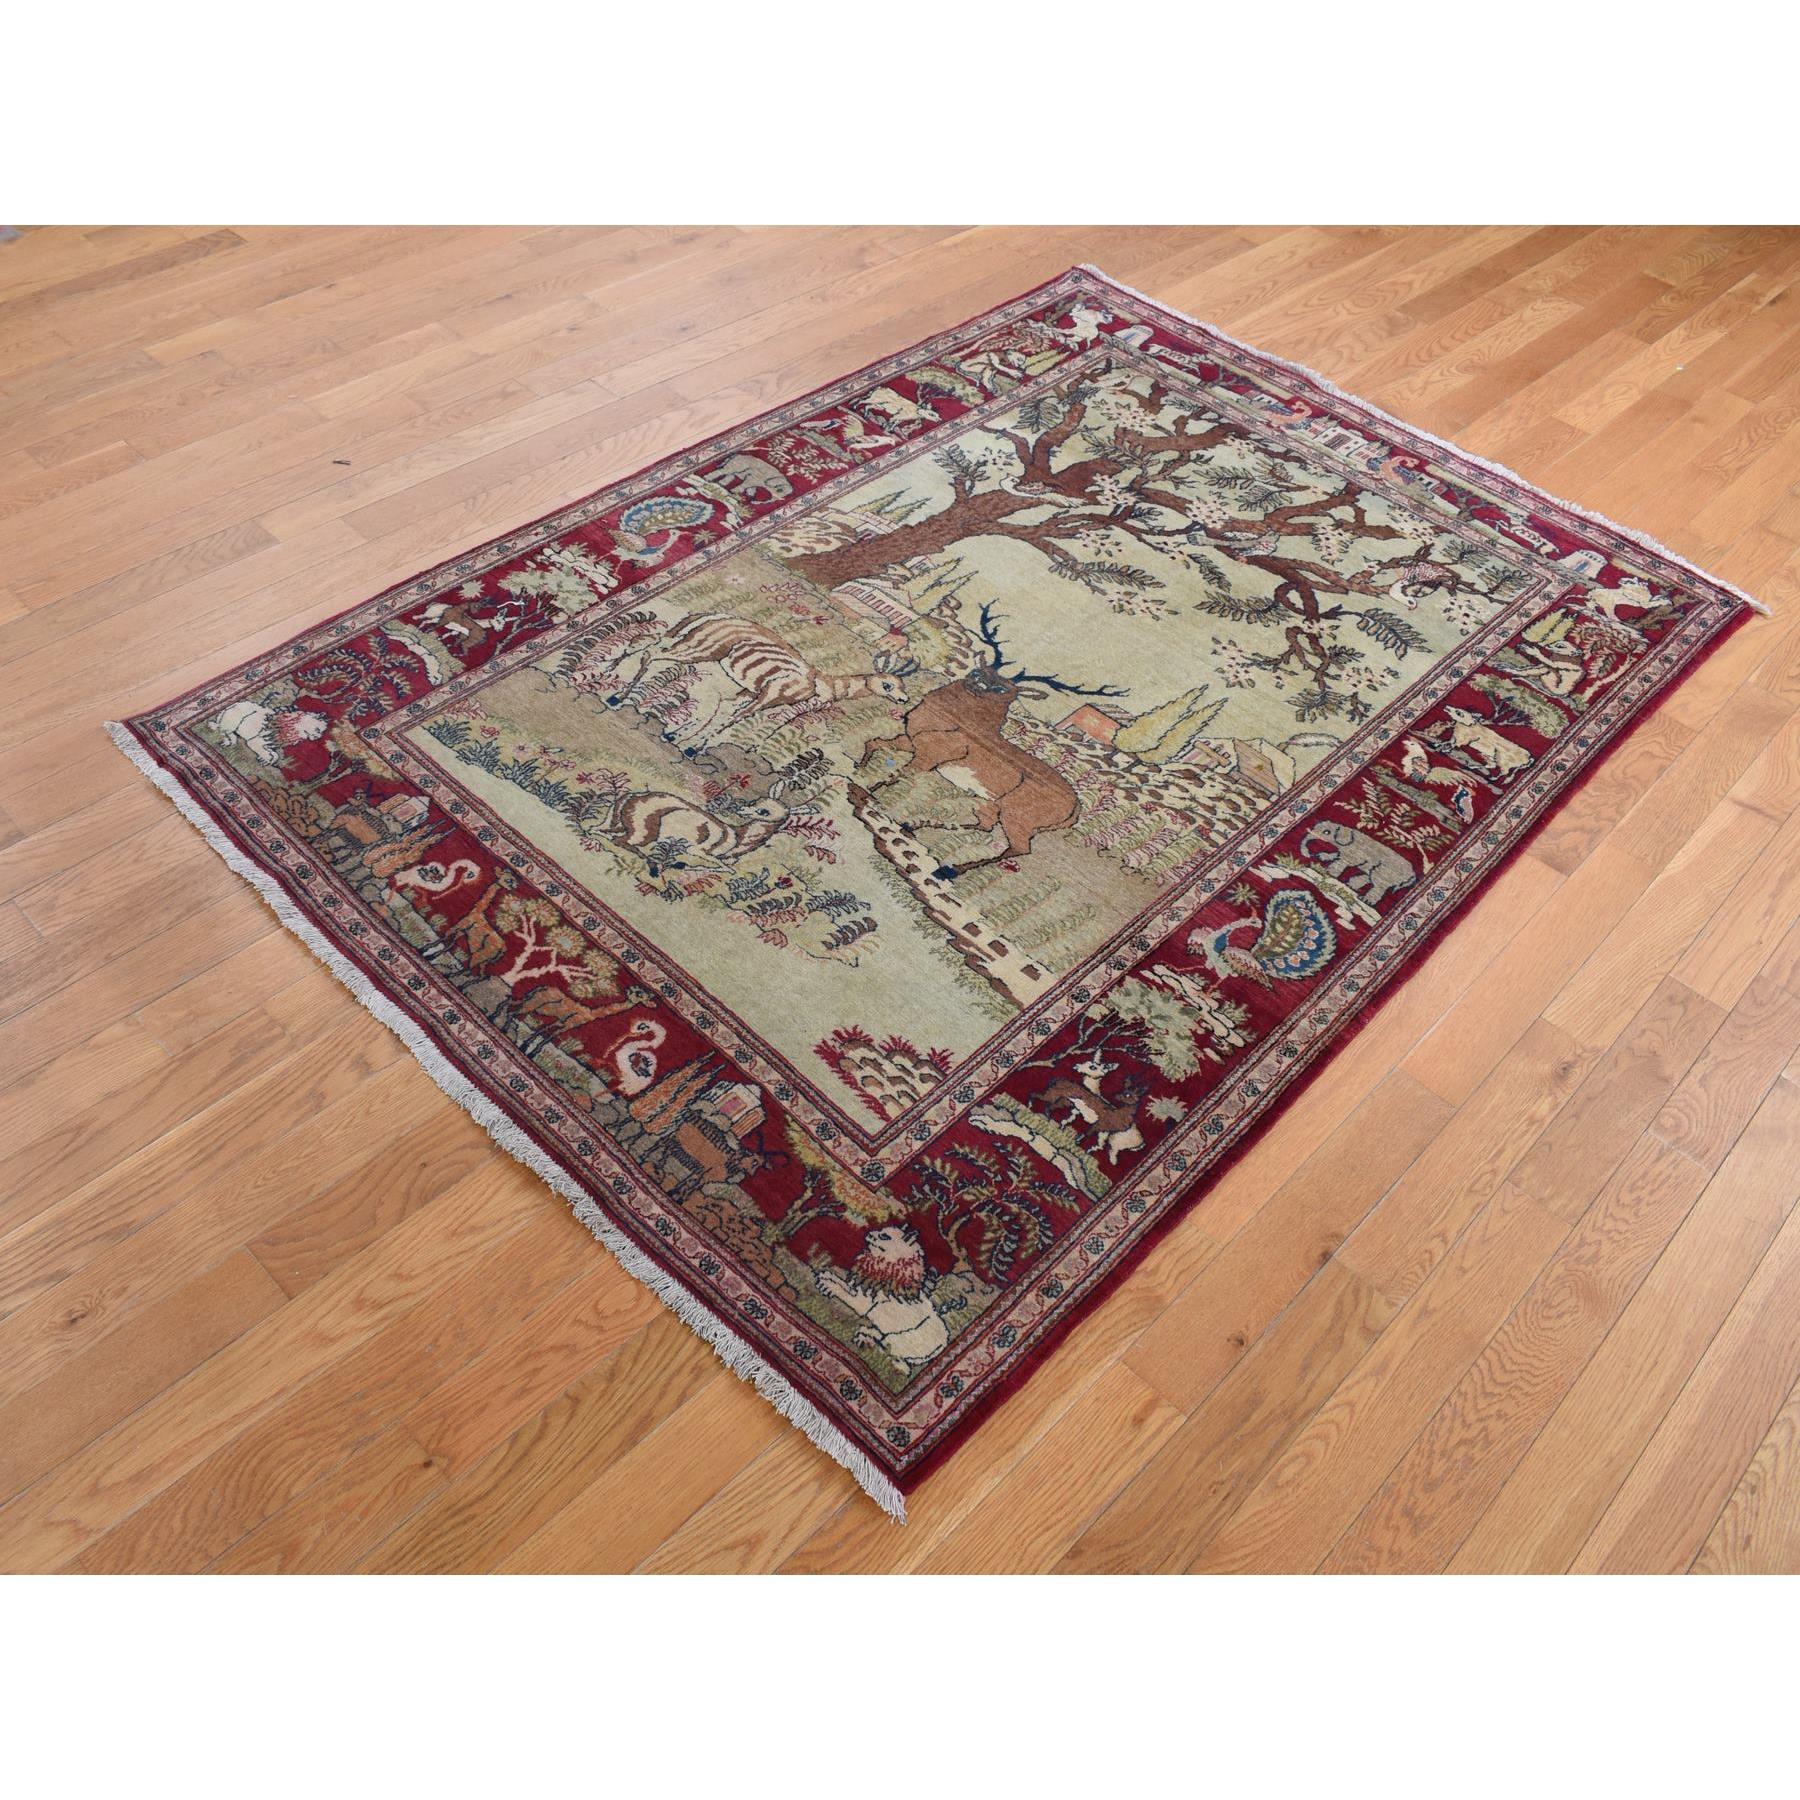 Medieval Ivory Antique Persian Pictorial Kashan Mint Condition Hand Knotted Pure Wool Rug For Sale